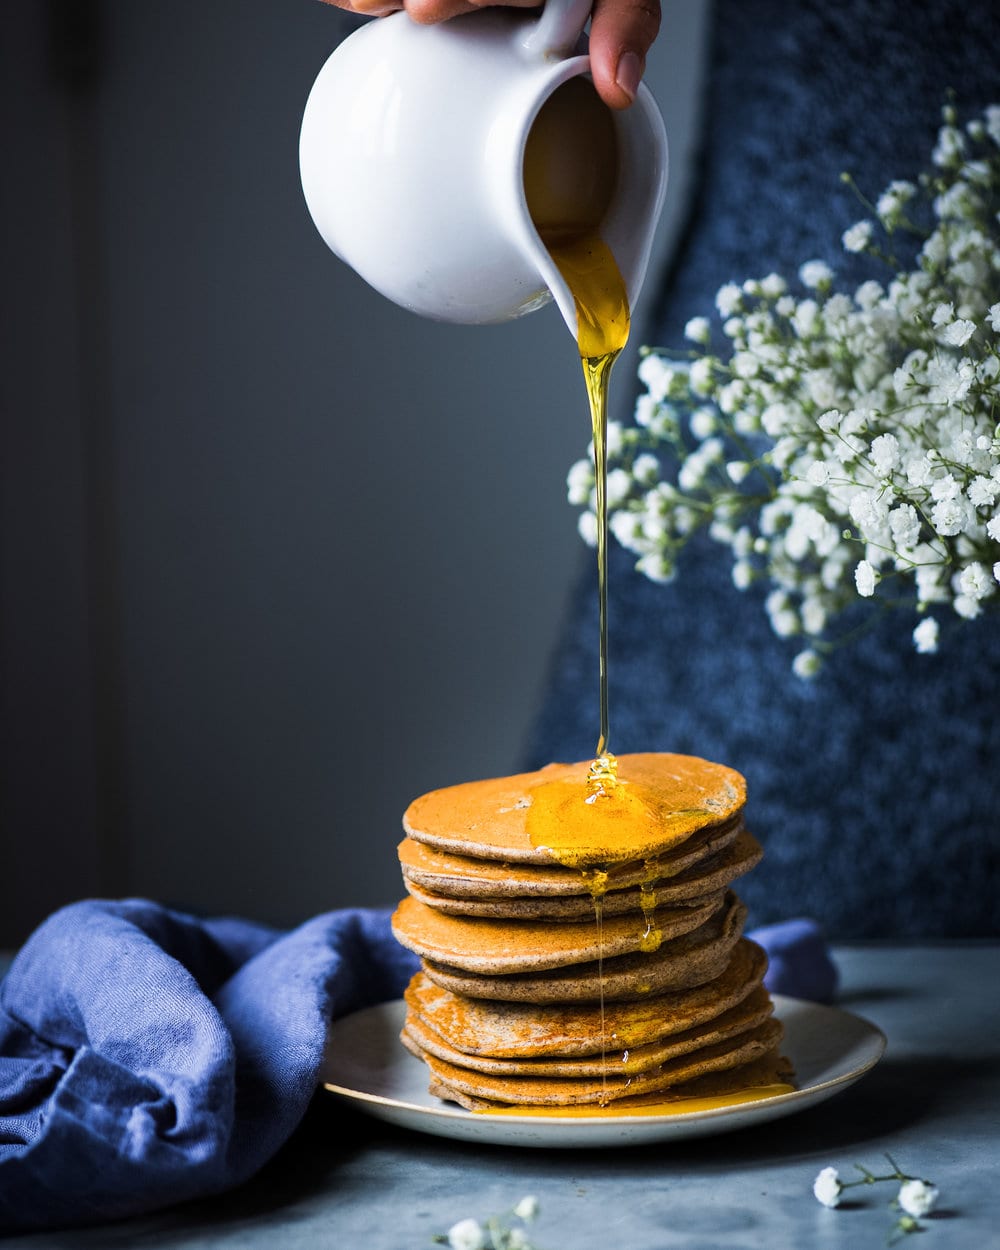 Side view of maple syrup being poured onto tall stack of pancakes on a grey plate.